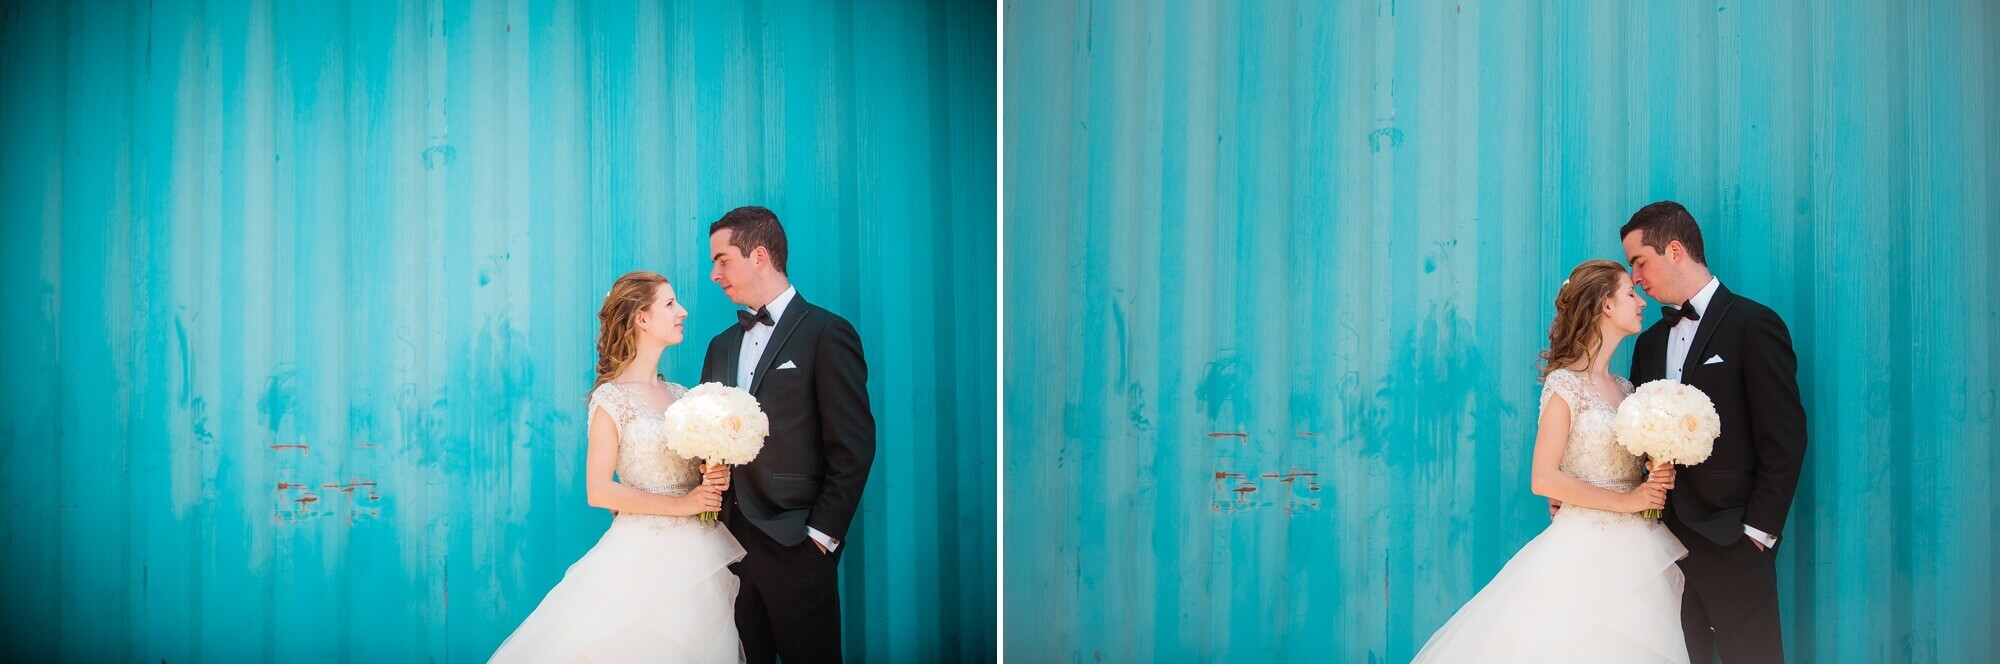 Portraits of the Bride and Groom in front of a blue steel wall in Toronto